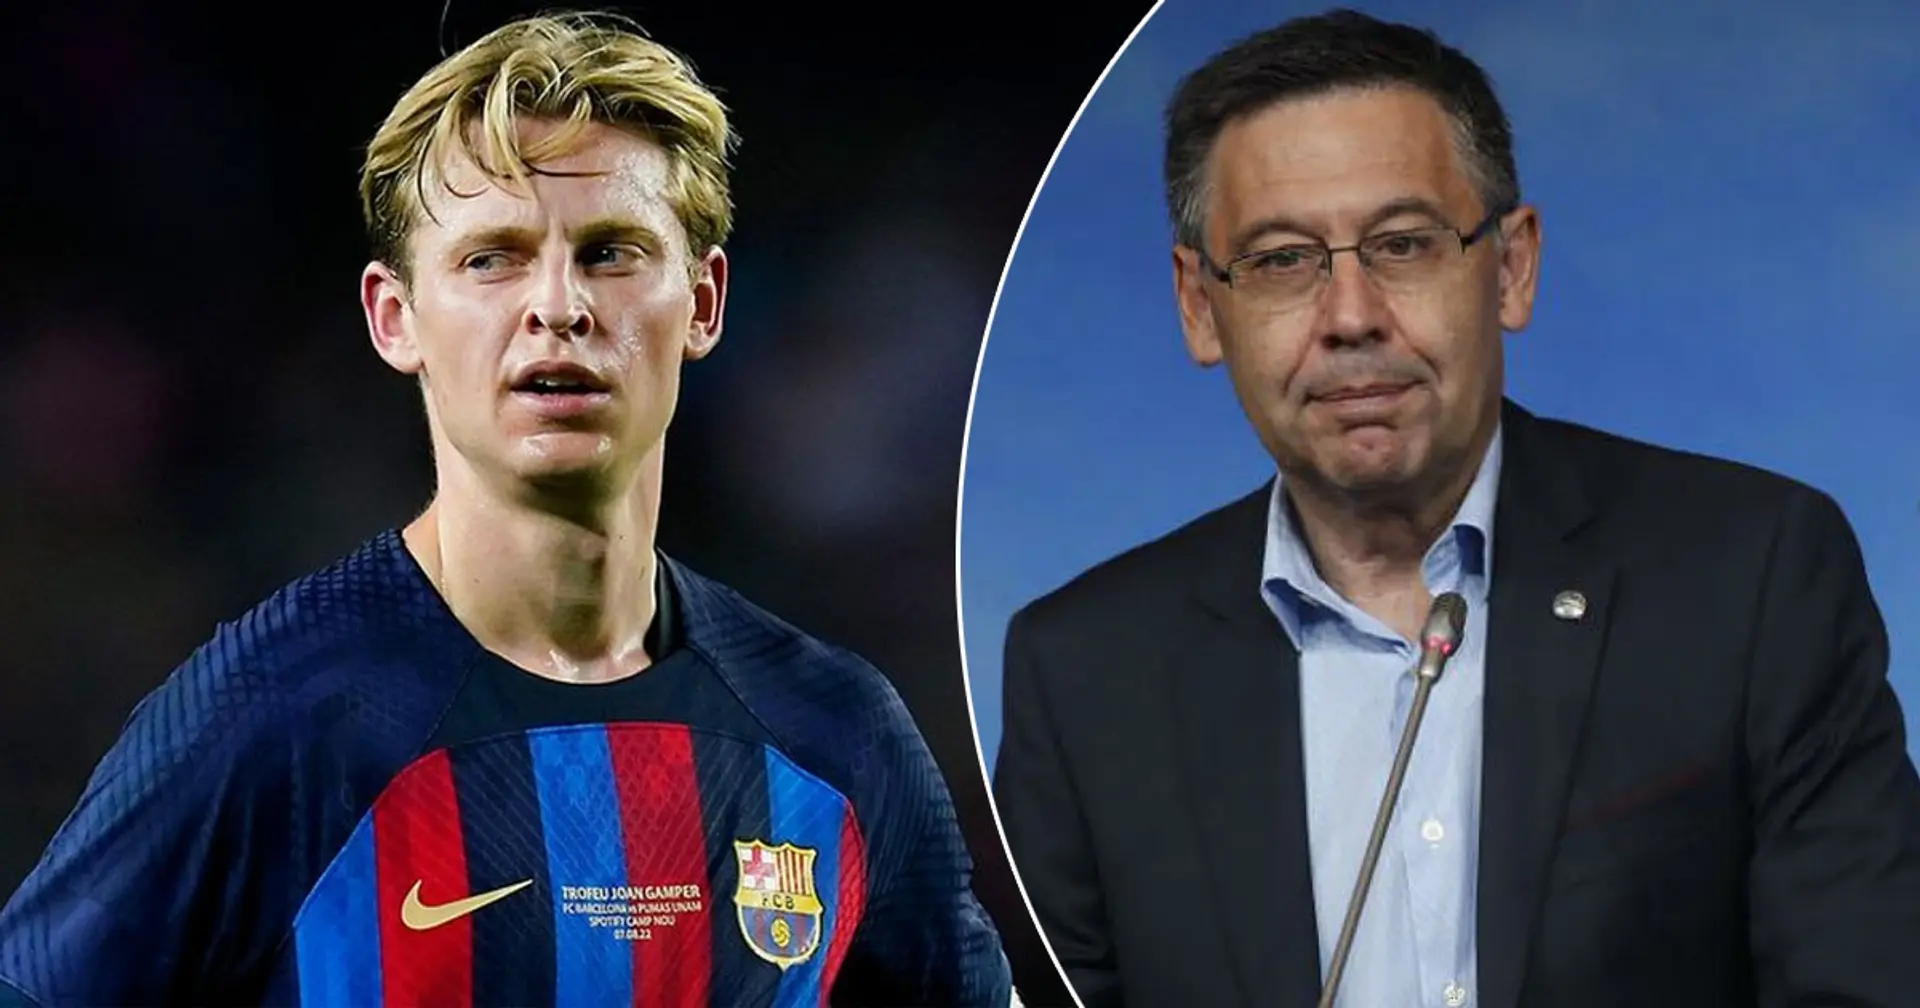 Bartomeu denies criminality allegations in contracts of De Jong and others